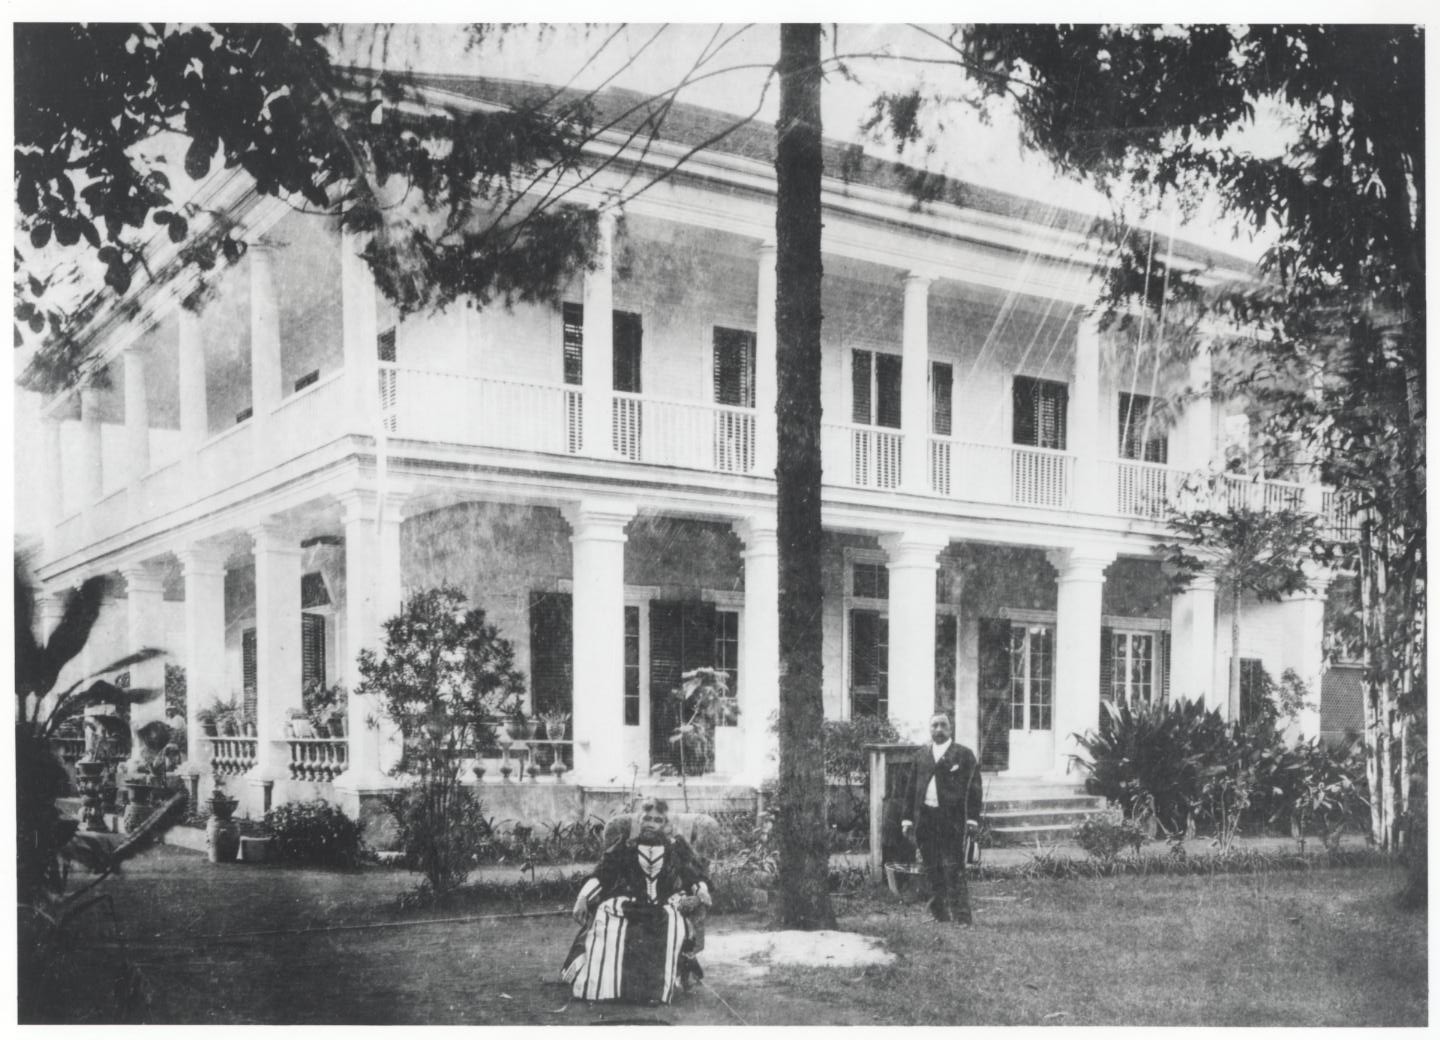   Queen sitting on the front lawn.   Hawaii State Archives  